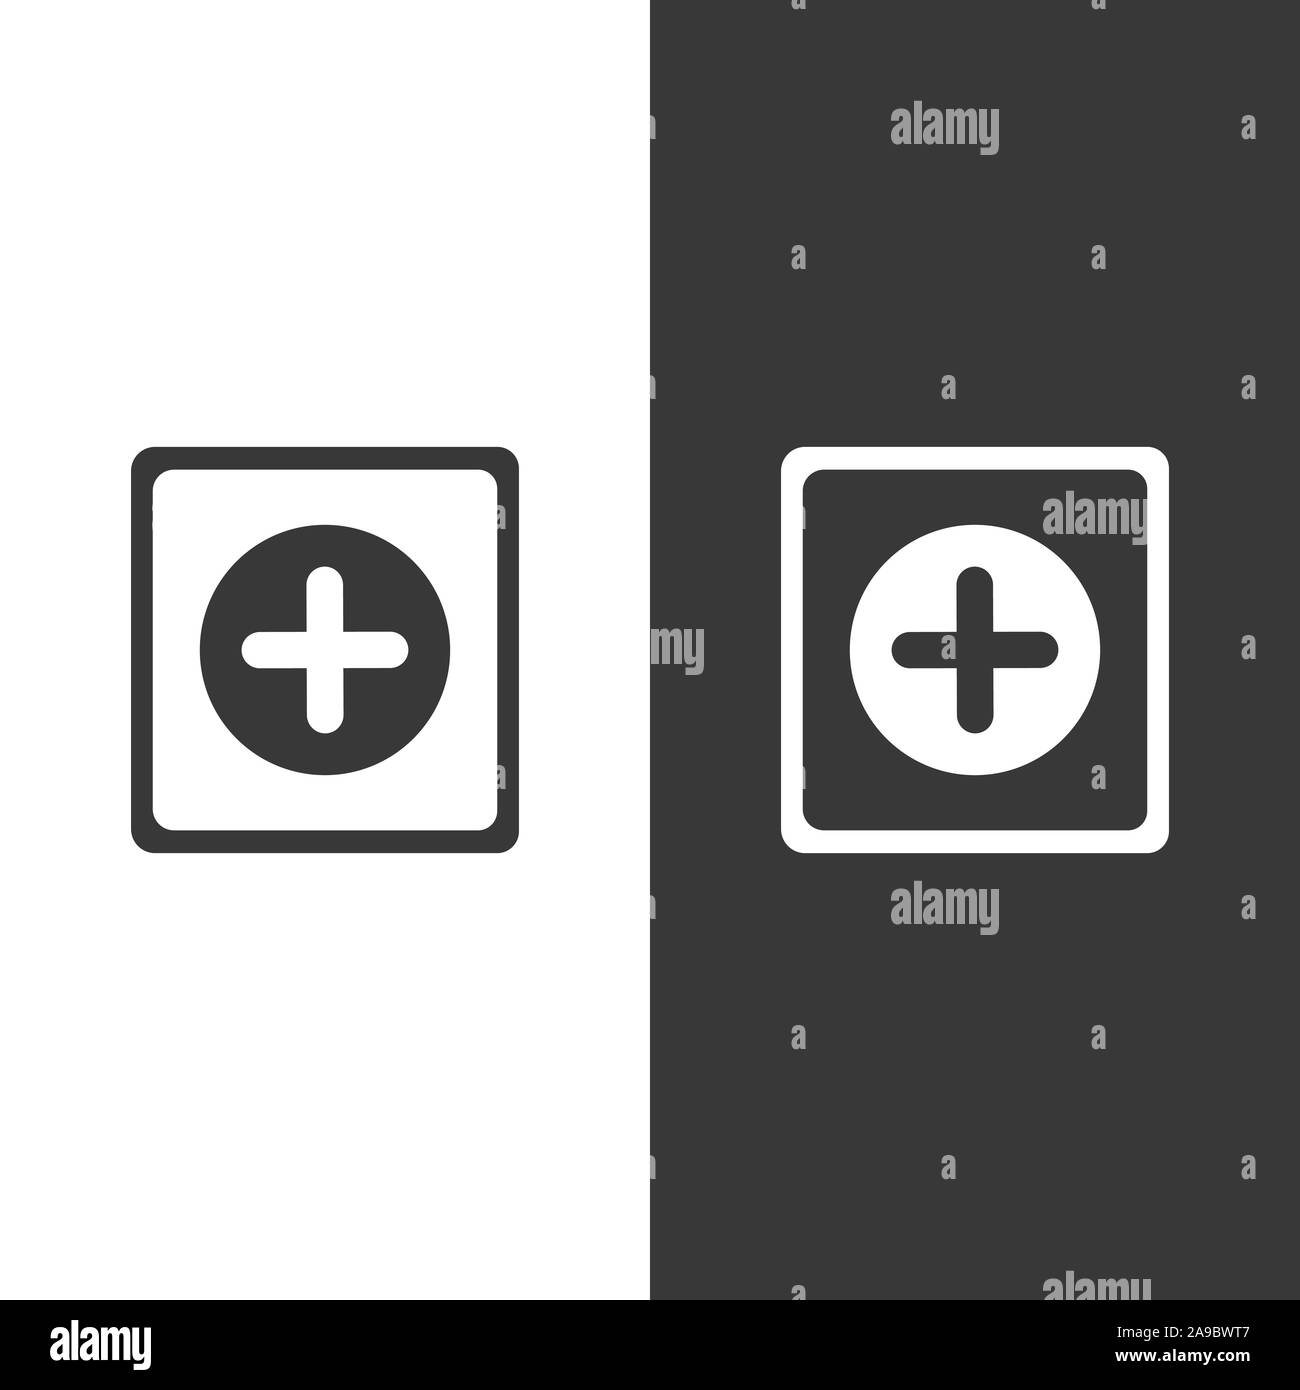 Pharmacy sign. Flat cross icon. Isolated image. Vector illustration Stock Vector